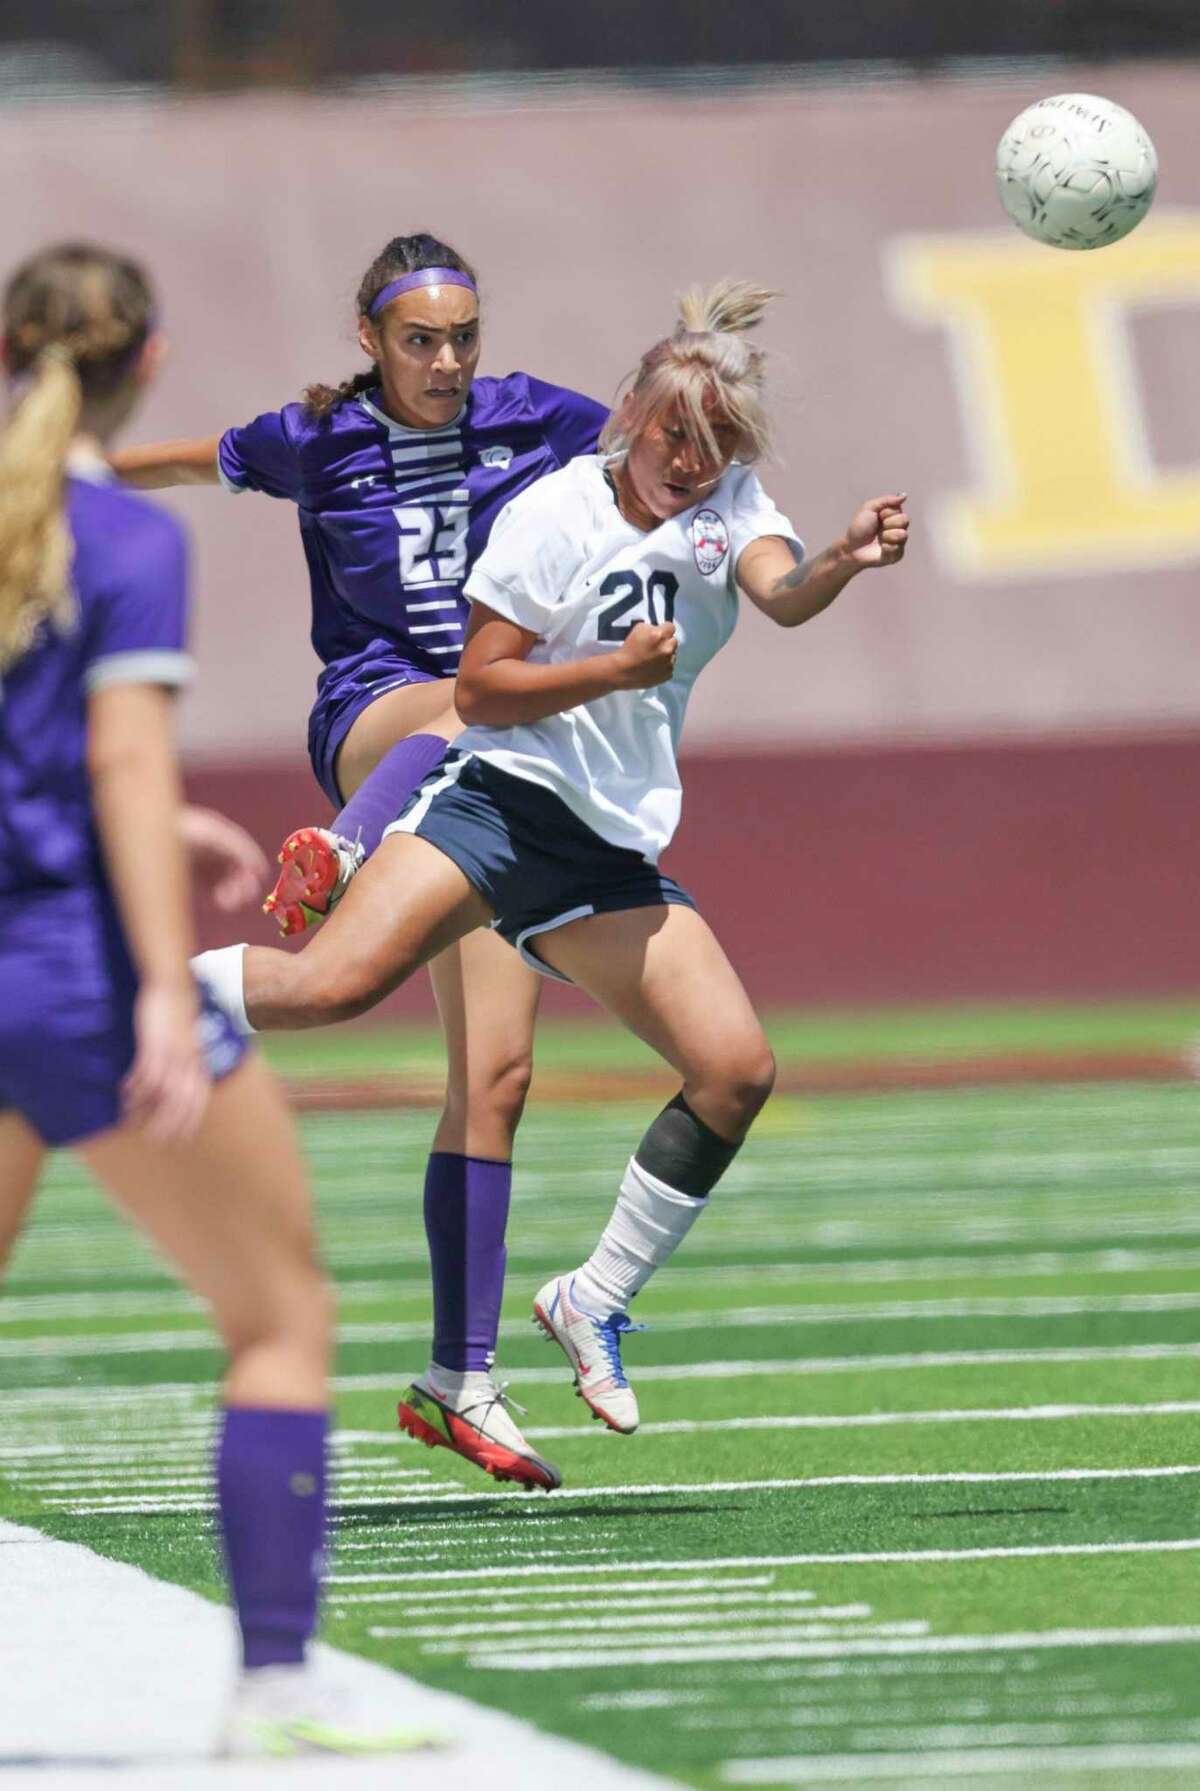 Atascocita midfielder Eagles Daniela Ortega (20) heads the ball against Ridge Point Panthers defender Kelsey Vaughn (23) in the first half in a Region III-6A semifinal girls playoff soccer game on April 8, 2022 at Abshire Stadium in Deer Park, TX.